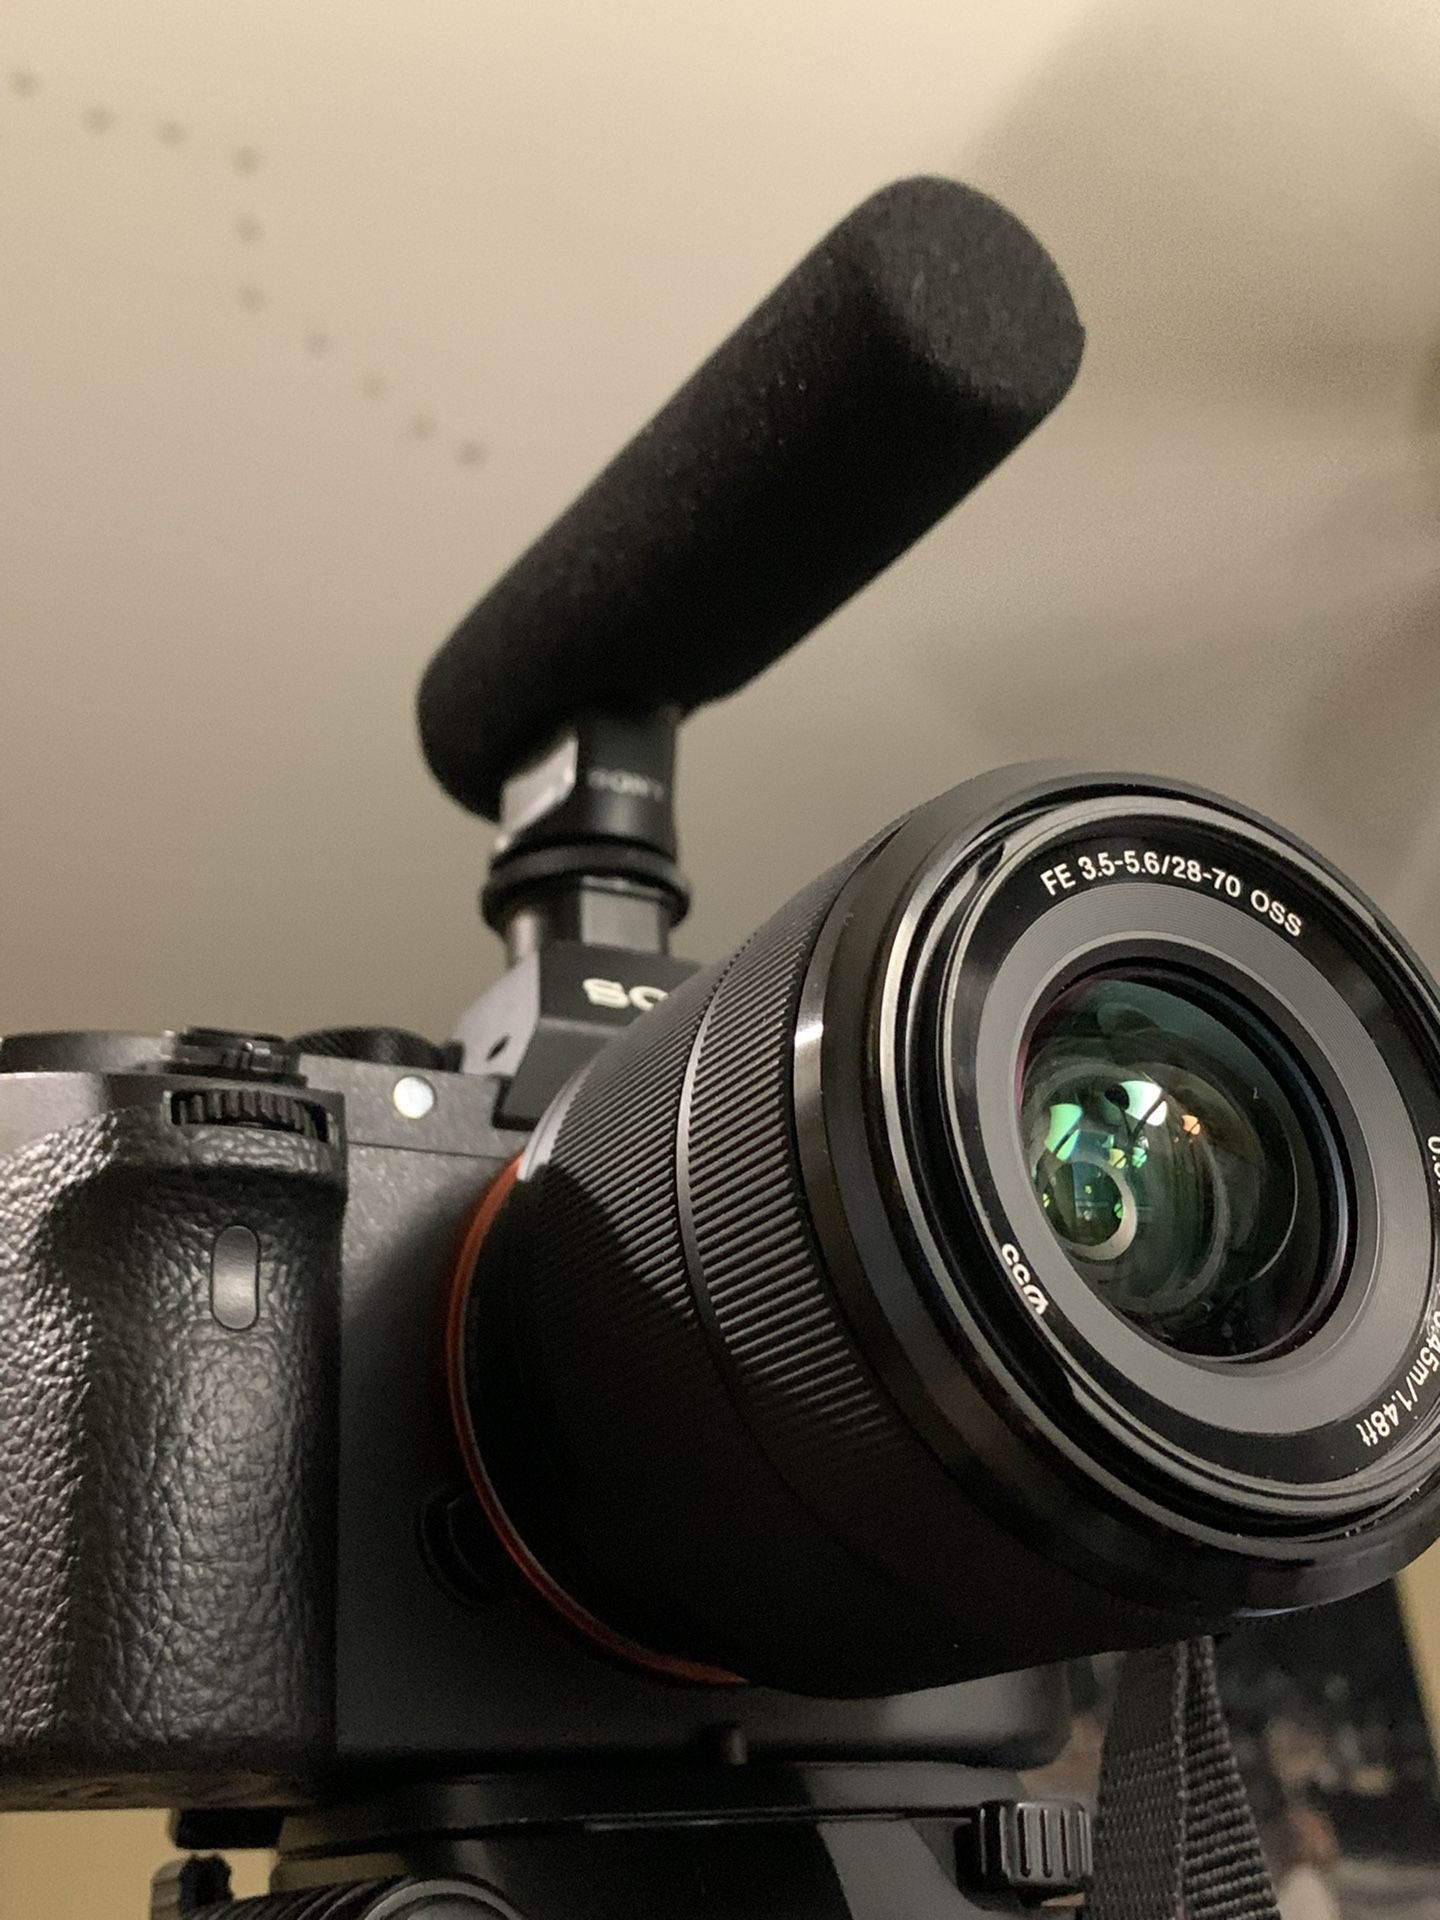 Sony Cameras: Sony A6000, Sony A7ii, (spare Canon Stable Zoom Lens)